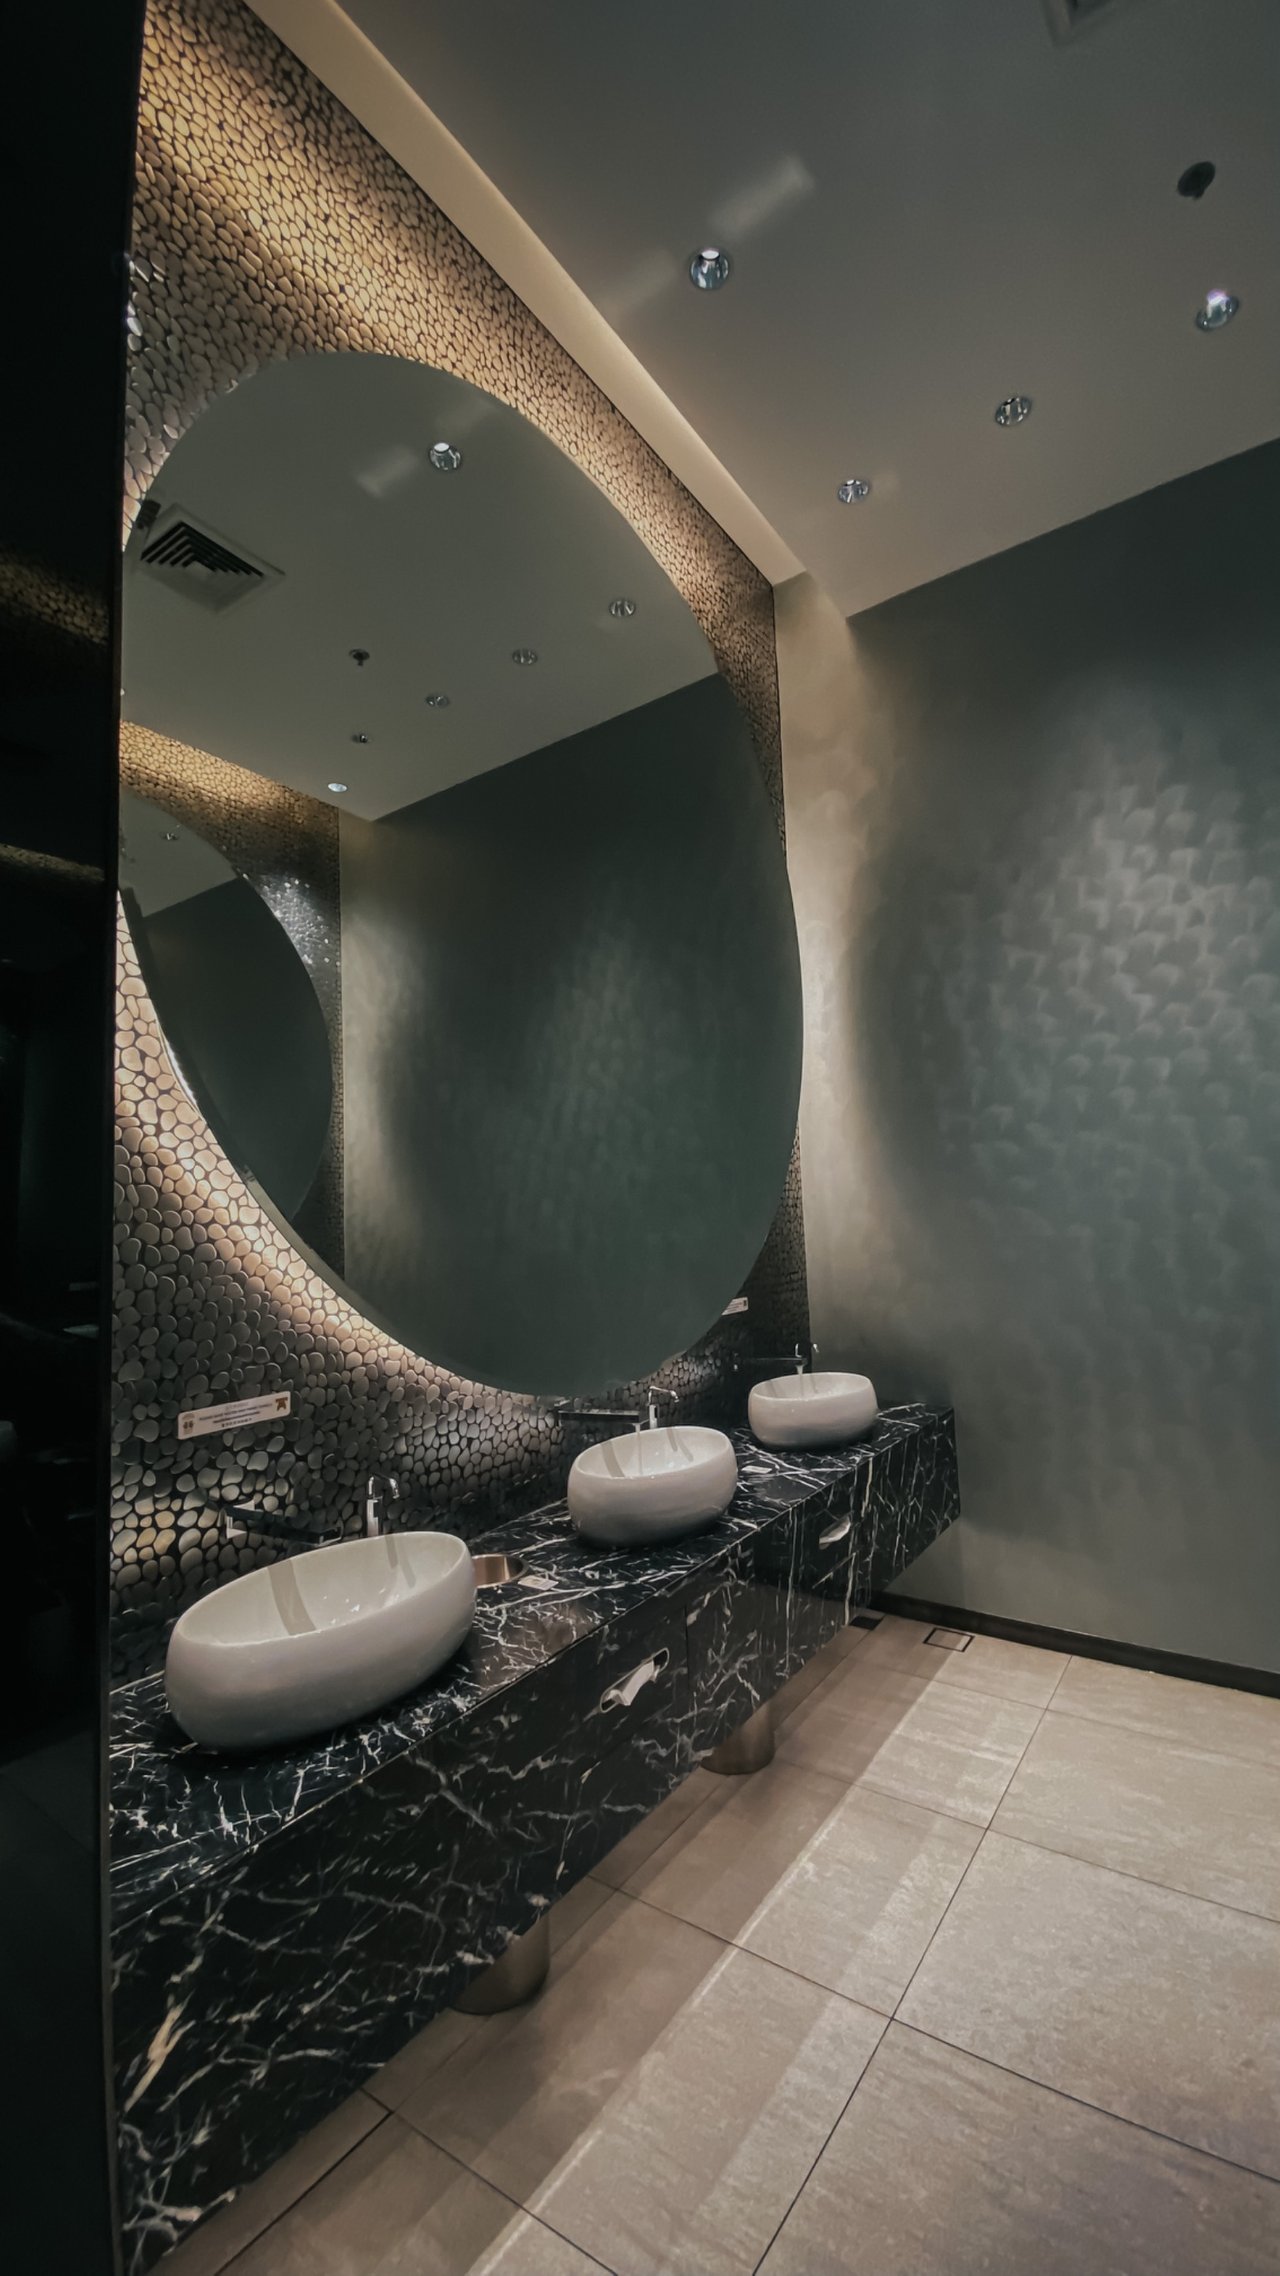 ICONSIAM : The restrooms that stun the world